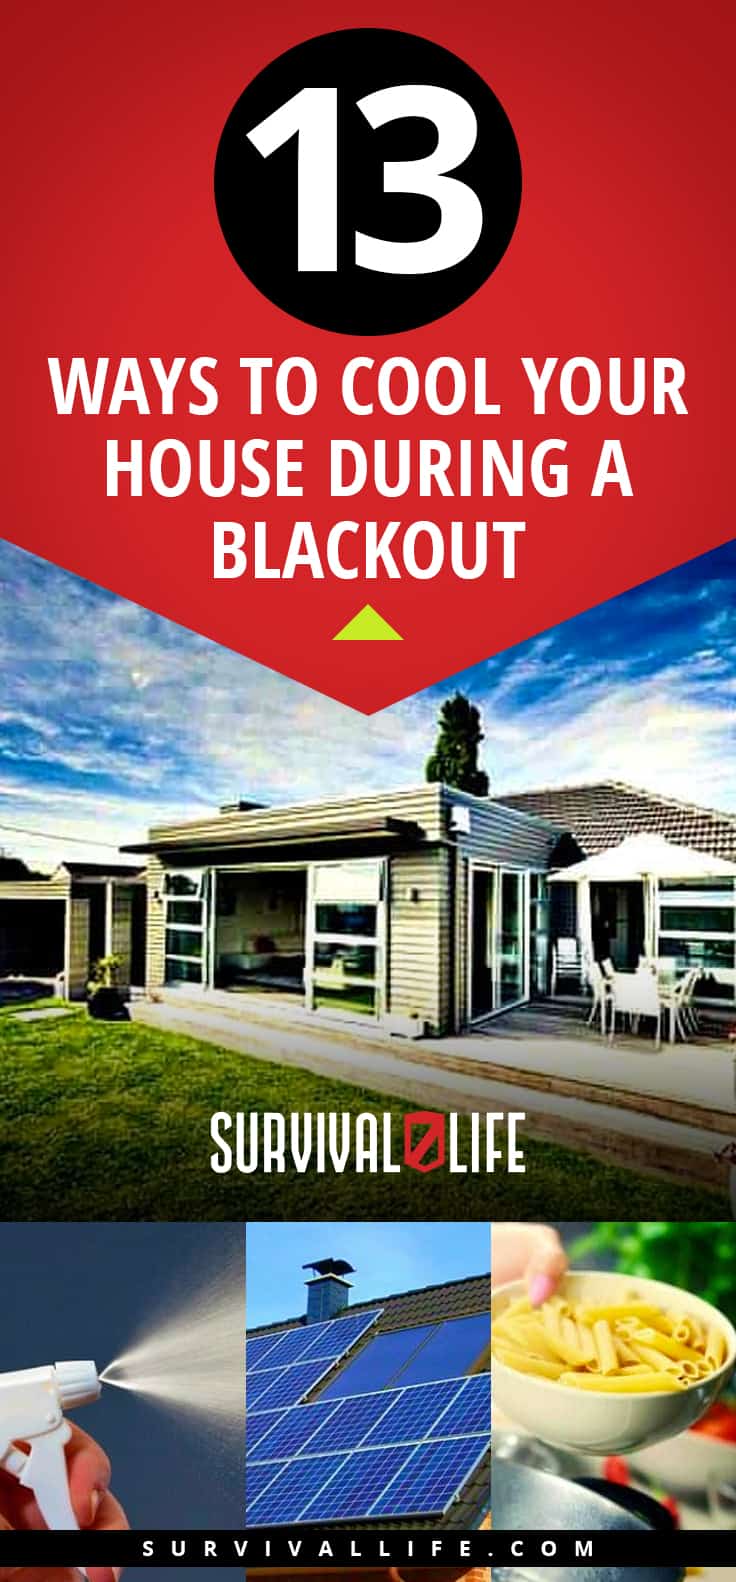 13 Ways To Cool Your House During A Blackout